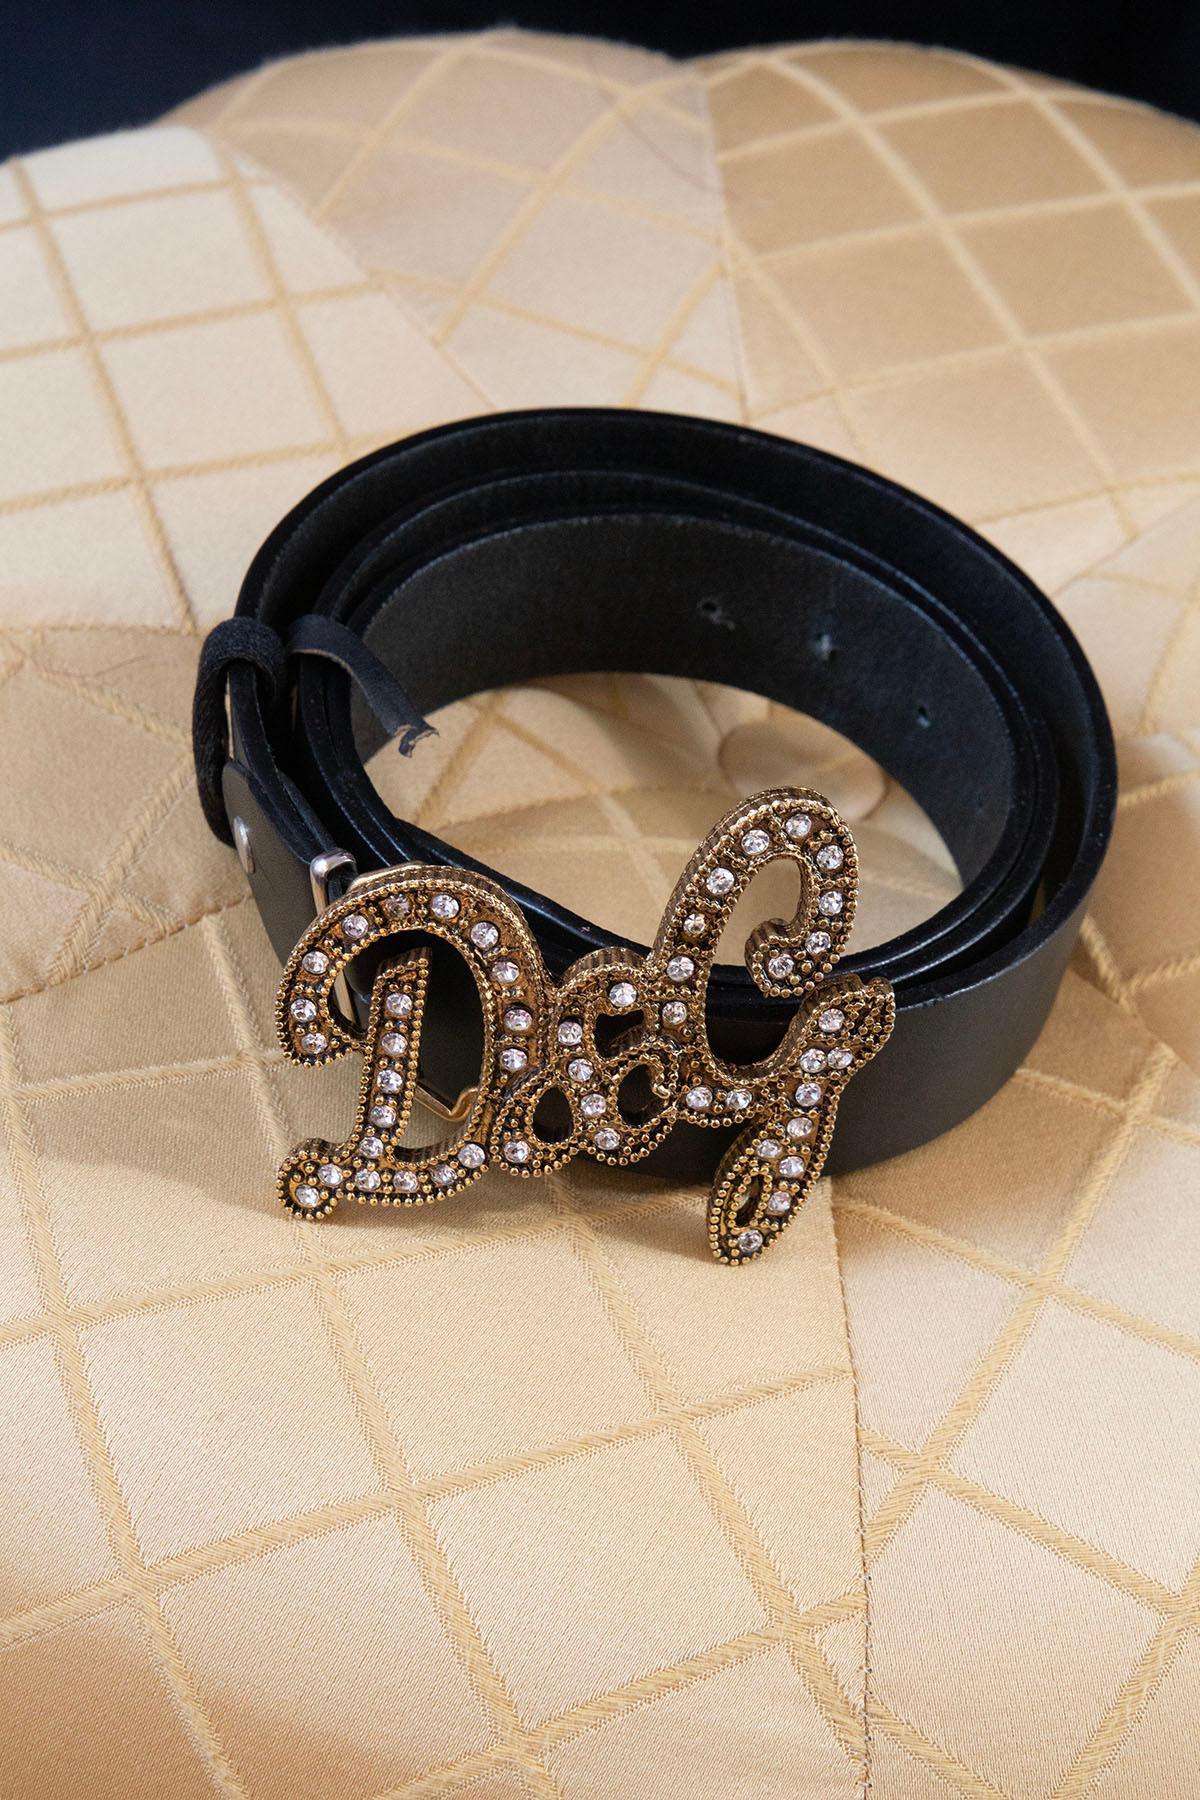 Dolce & Gabbana Black leather belts with rhinestones For Sale 5